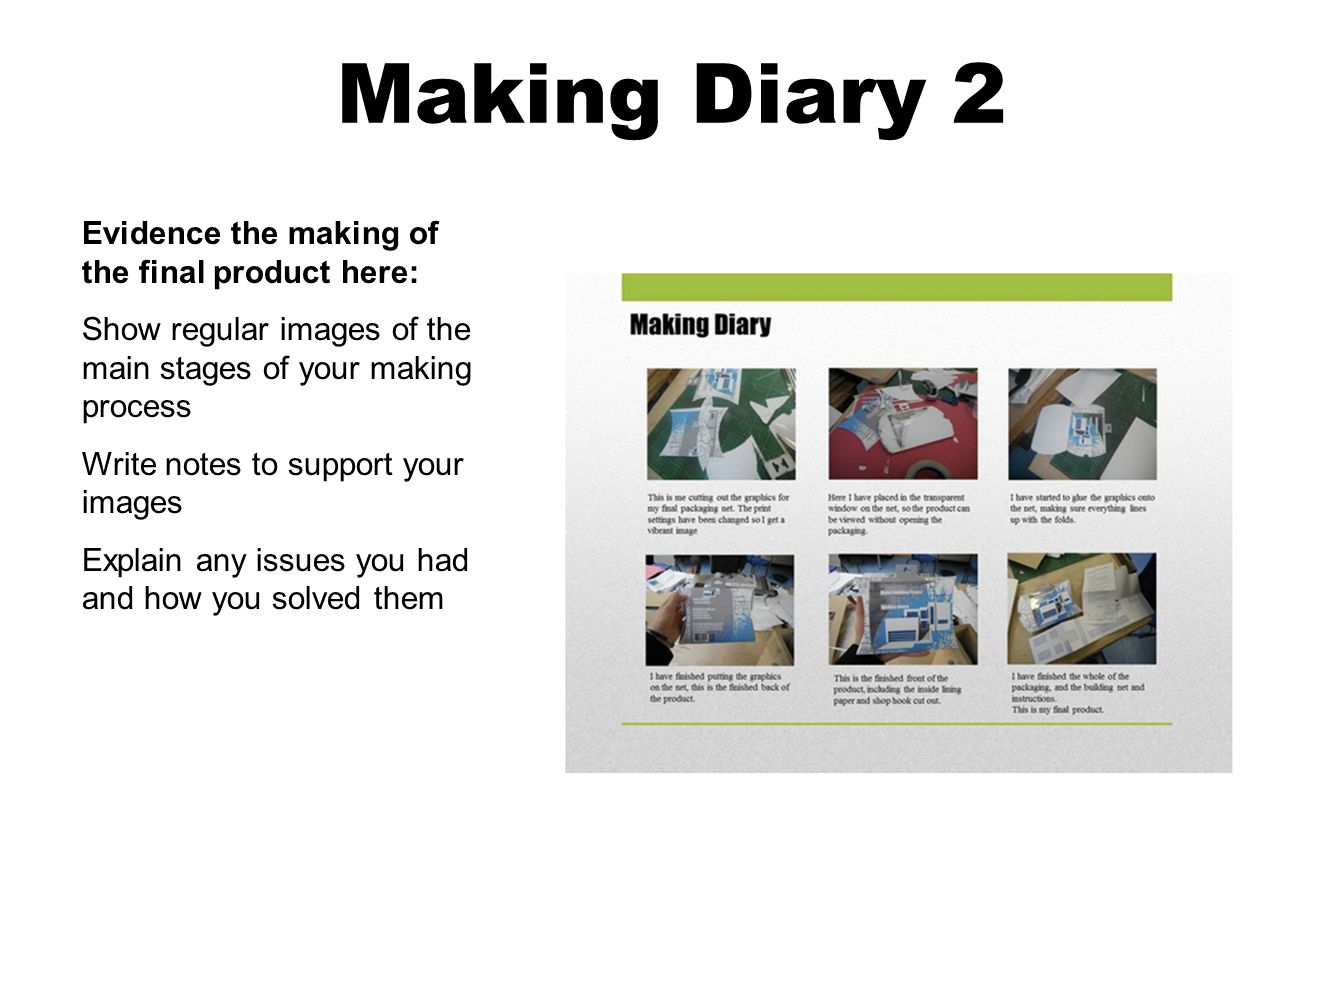 Making Diary 2 Evidence the making of the final product here: Show regular images of the main stages of your making process Write notes to support your images Explain any issues you had and how you solved them